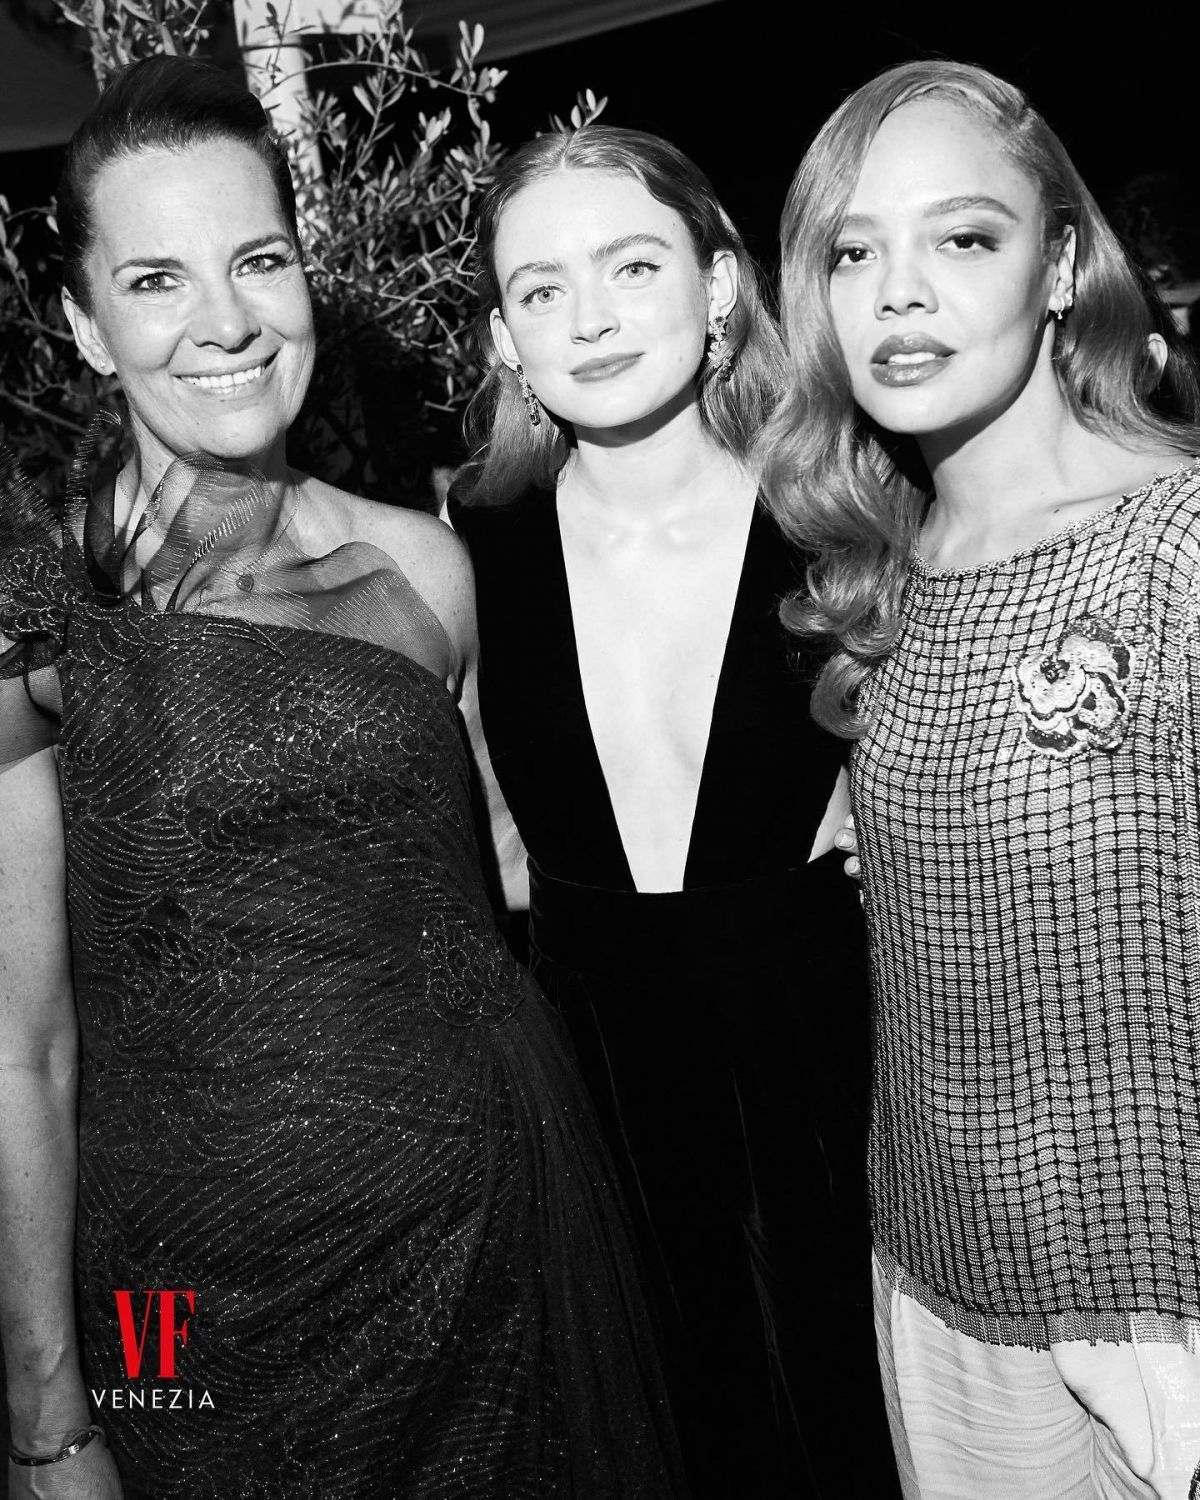 Sadie Sink attends Armani Beauty Private Dinner Photoshoot at Venice Film Festival 4